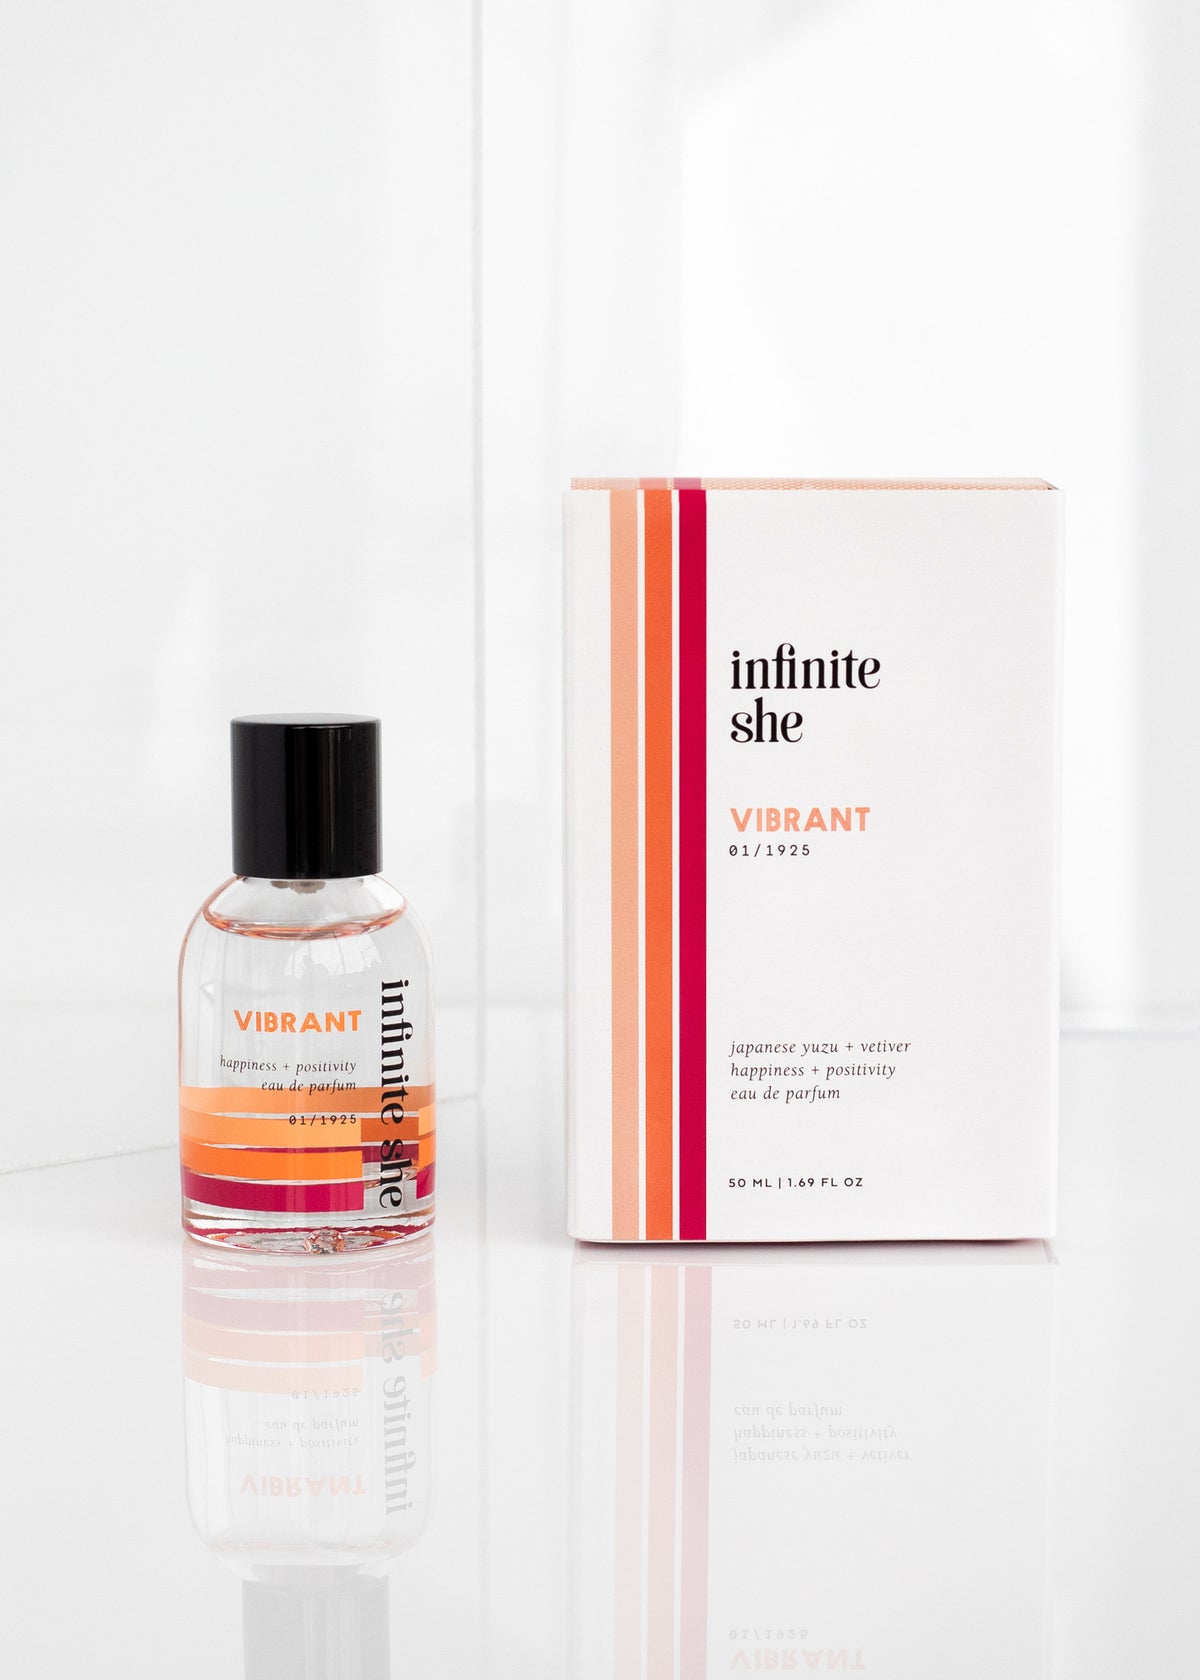 A Margot Elena cosmetic product, "Infinite She Vibrant Eau de Parfum," placed on a reflective surface. The package is white with orange and pink stripes, alongside a clear bottle with a matching label that subtly highlights the essence of.